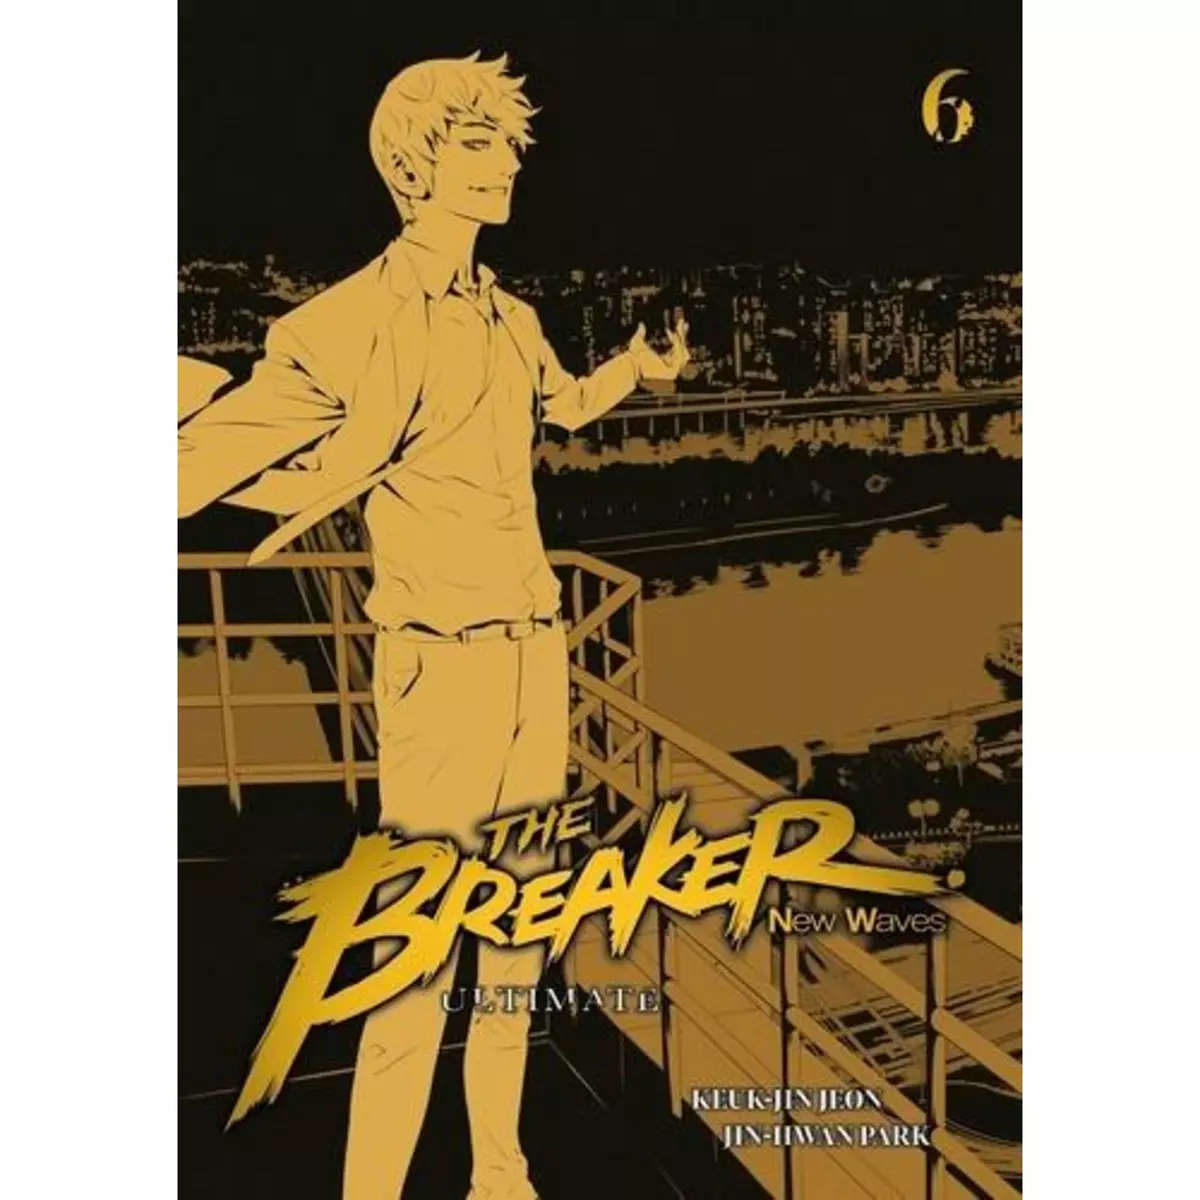  THE BREAKER NEW WAVES - ULTIMATE TOME 6 , Jeon Keuk-Jin